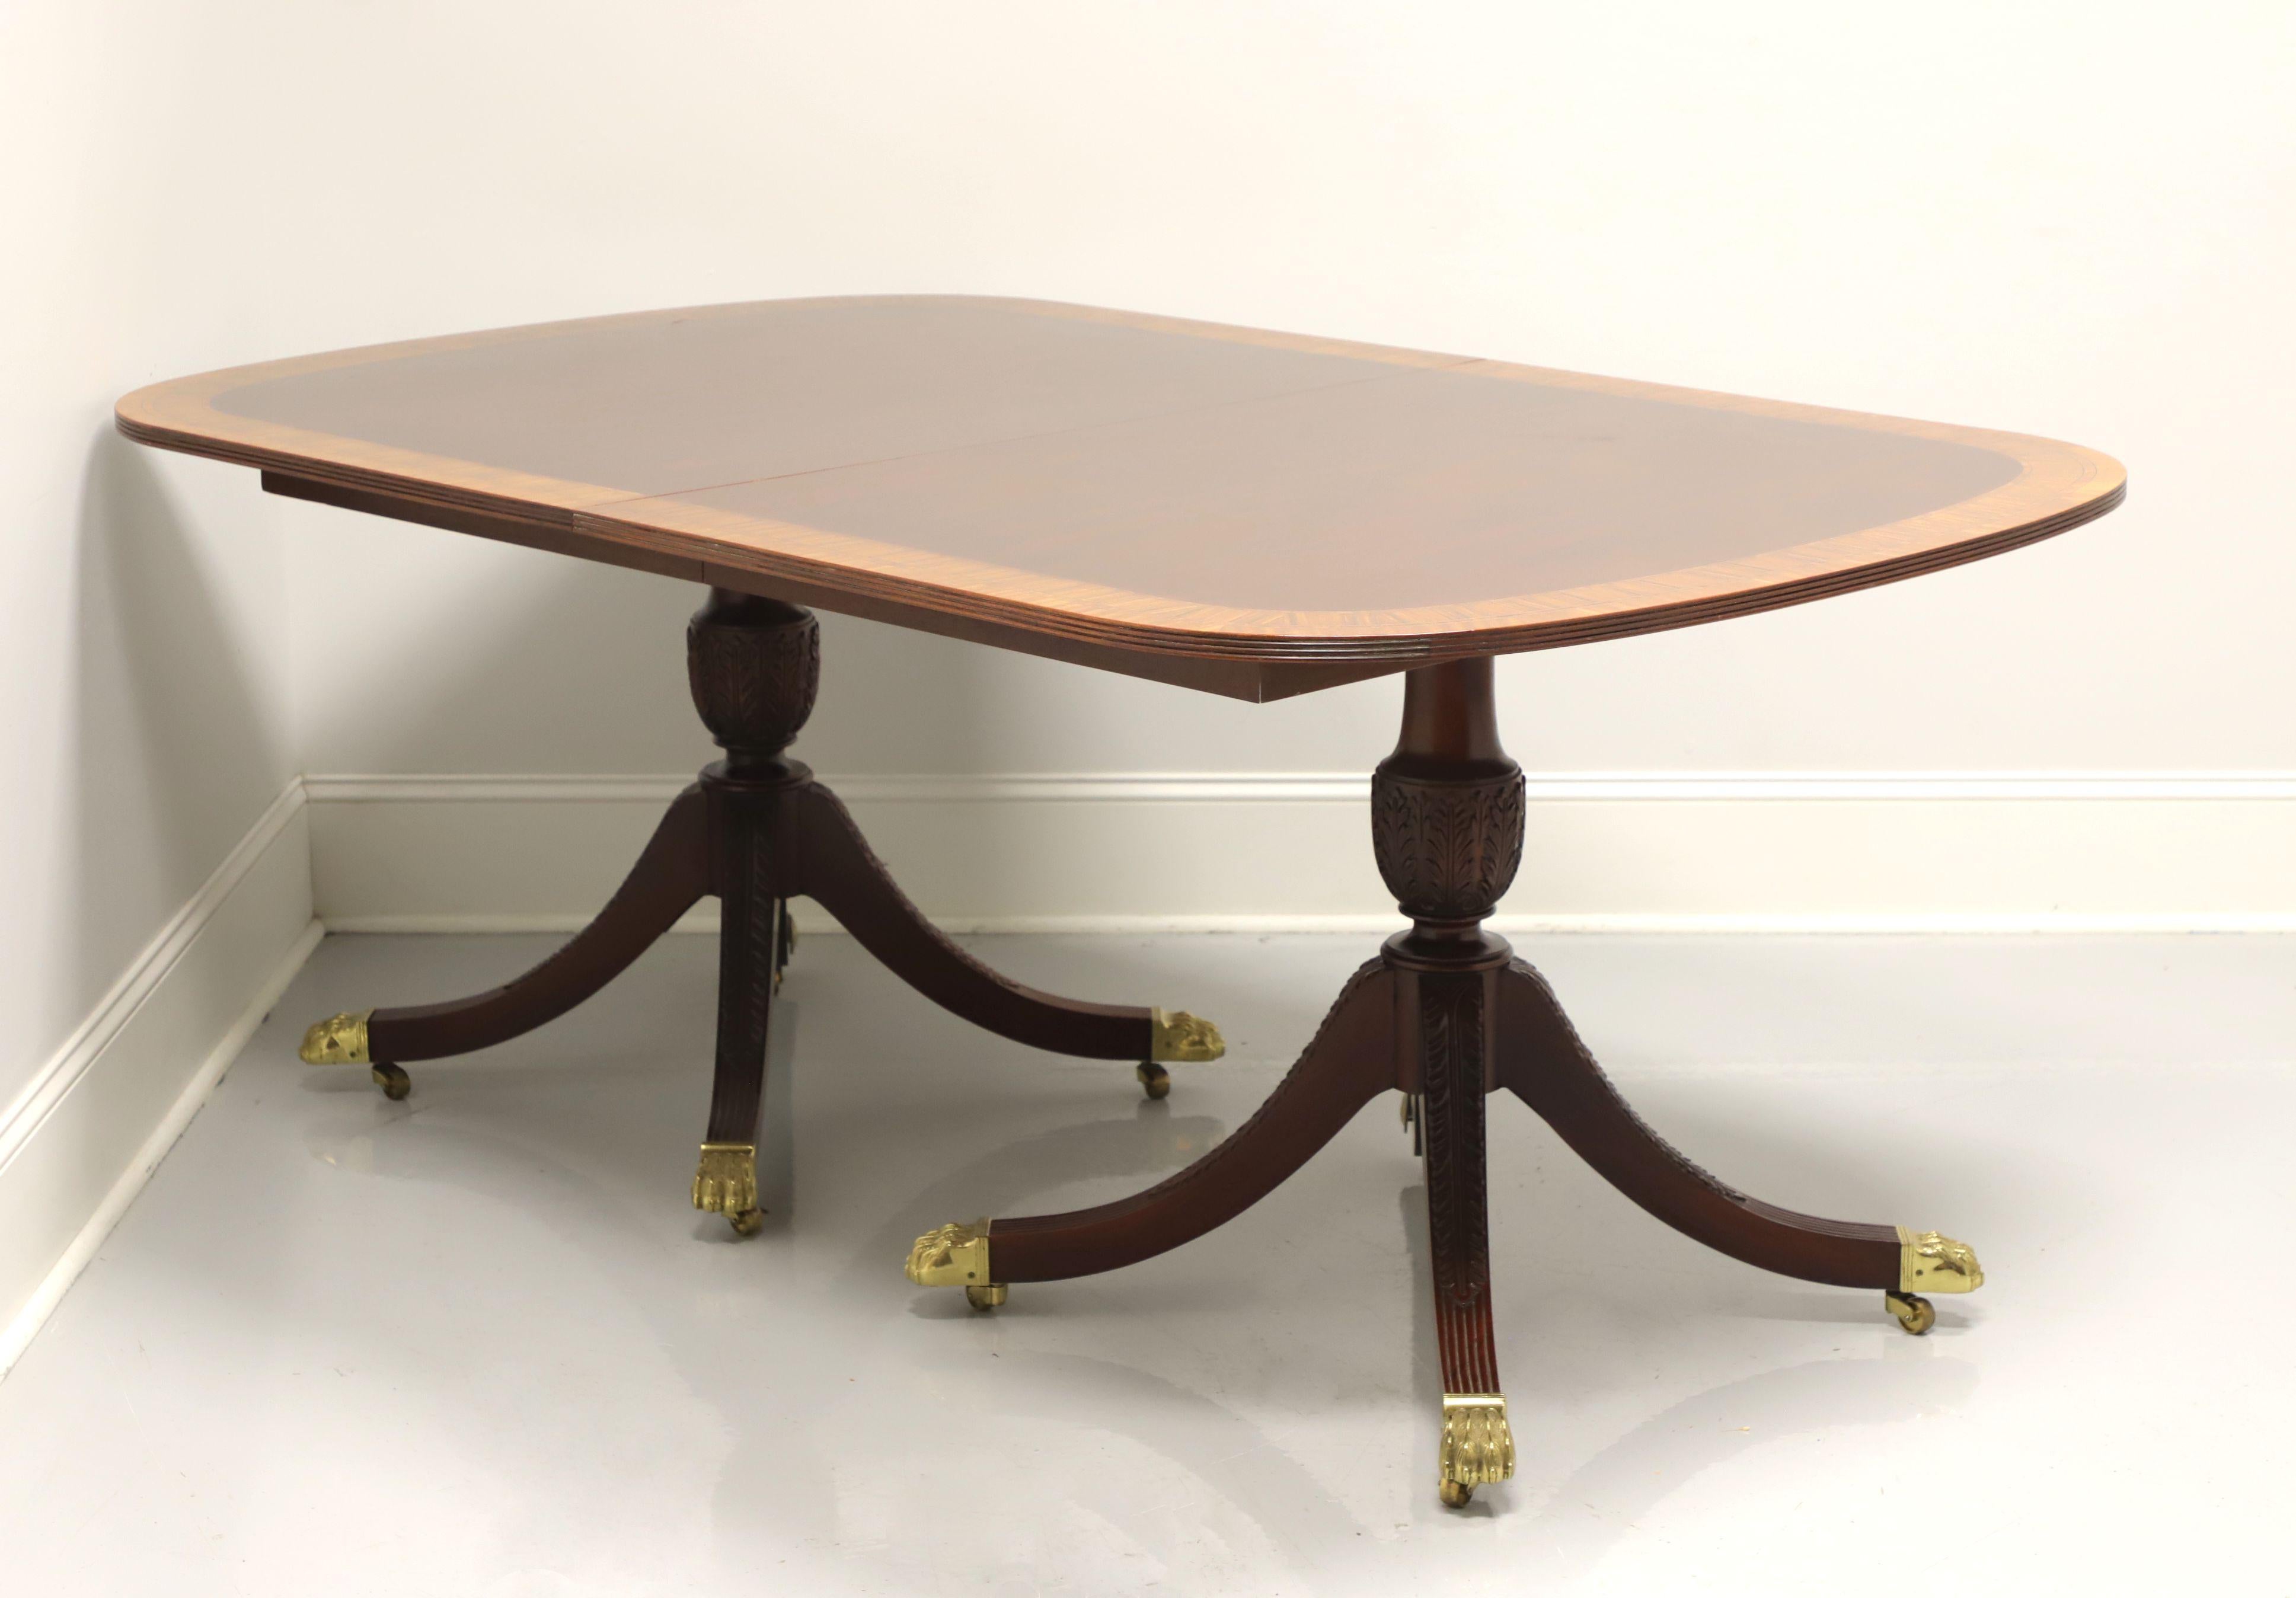 A Traditional style double pedestal dining table by Councill Craftsmen. Mahogany with a cross-banded rounded corners top, wood expansion sliders, carved double pedestal with four carved legs, brass toe-caps and casters. Includes two extension